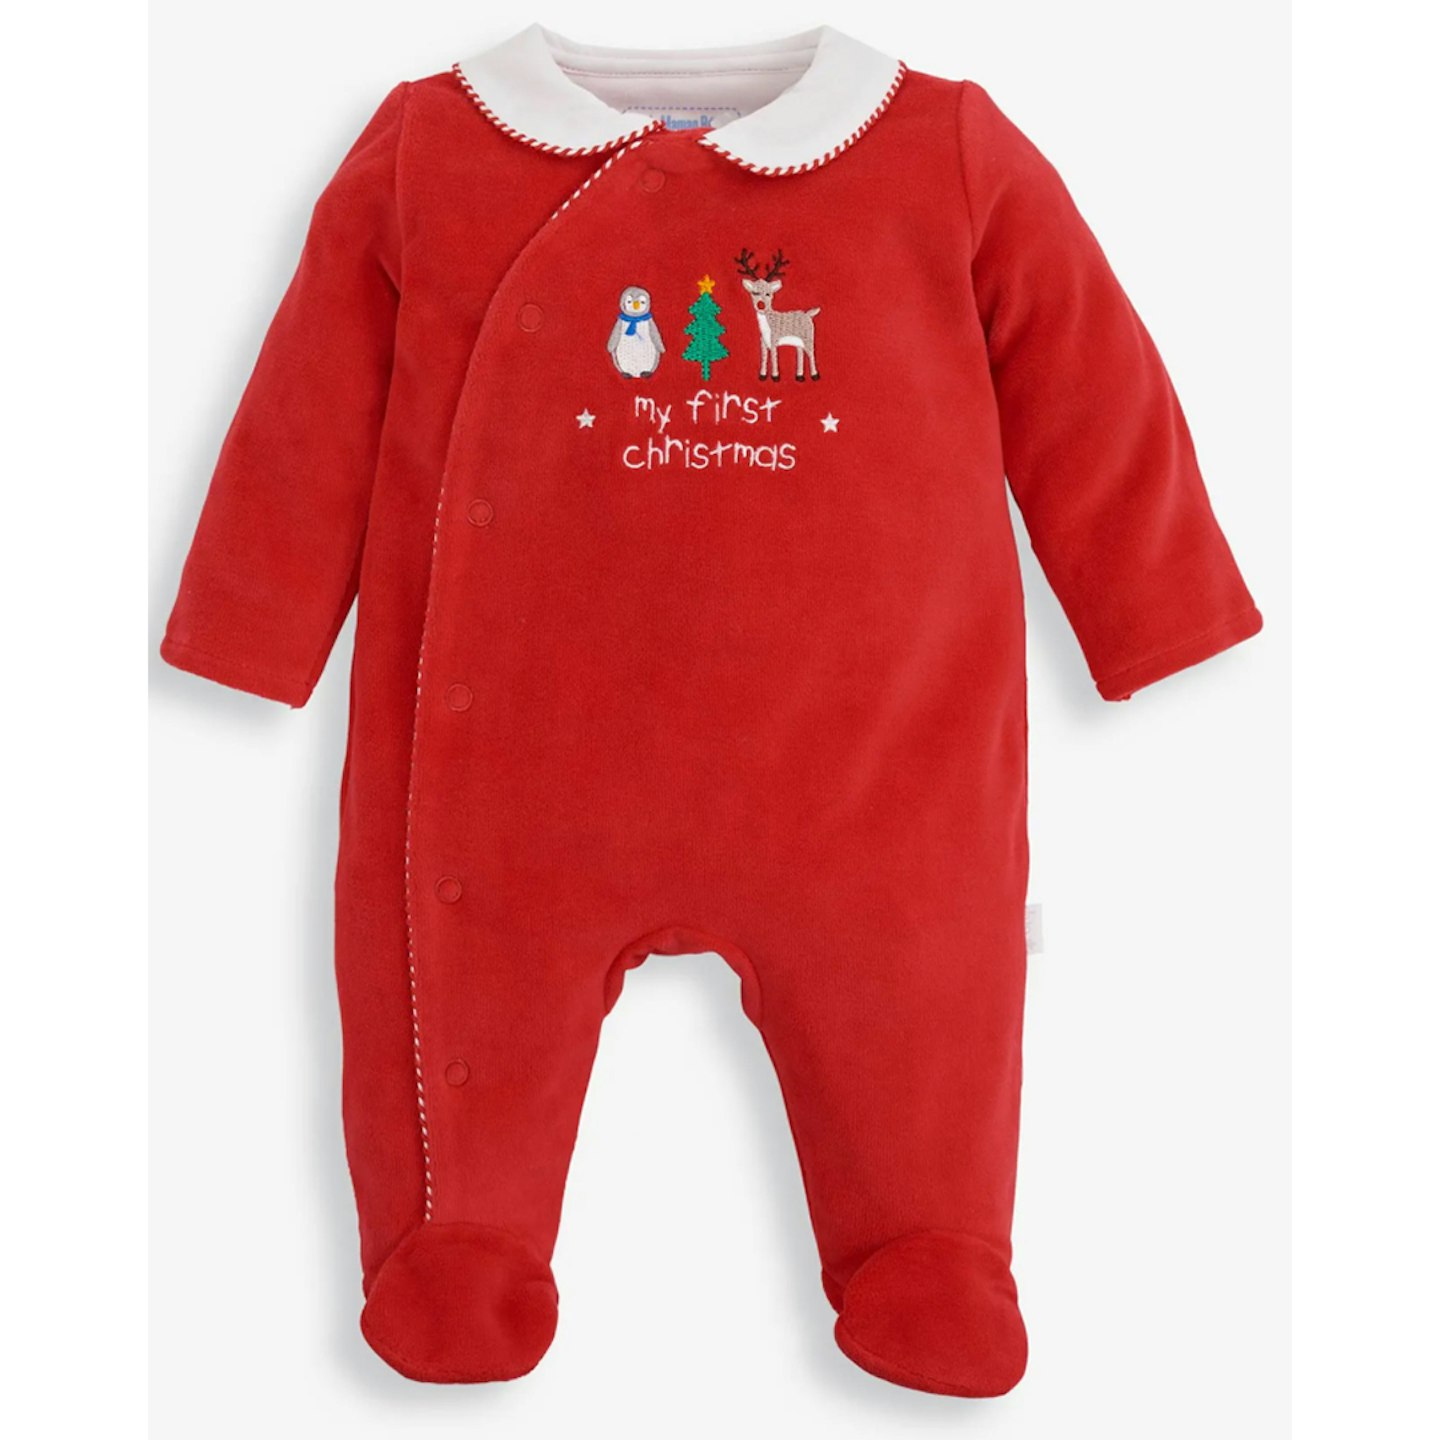 MY FIRST CHRISTMAS BABY SLEEPSUIT